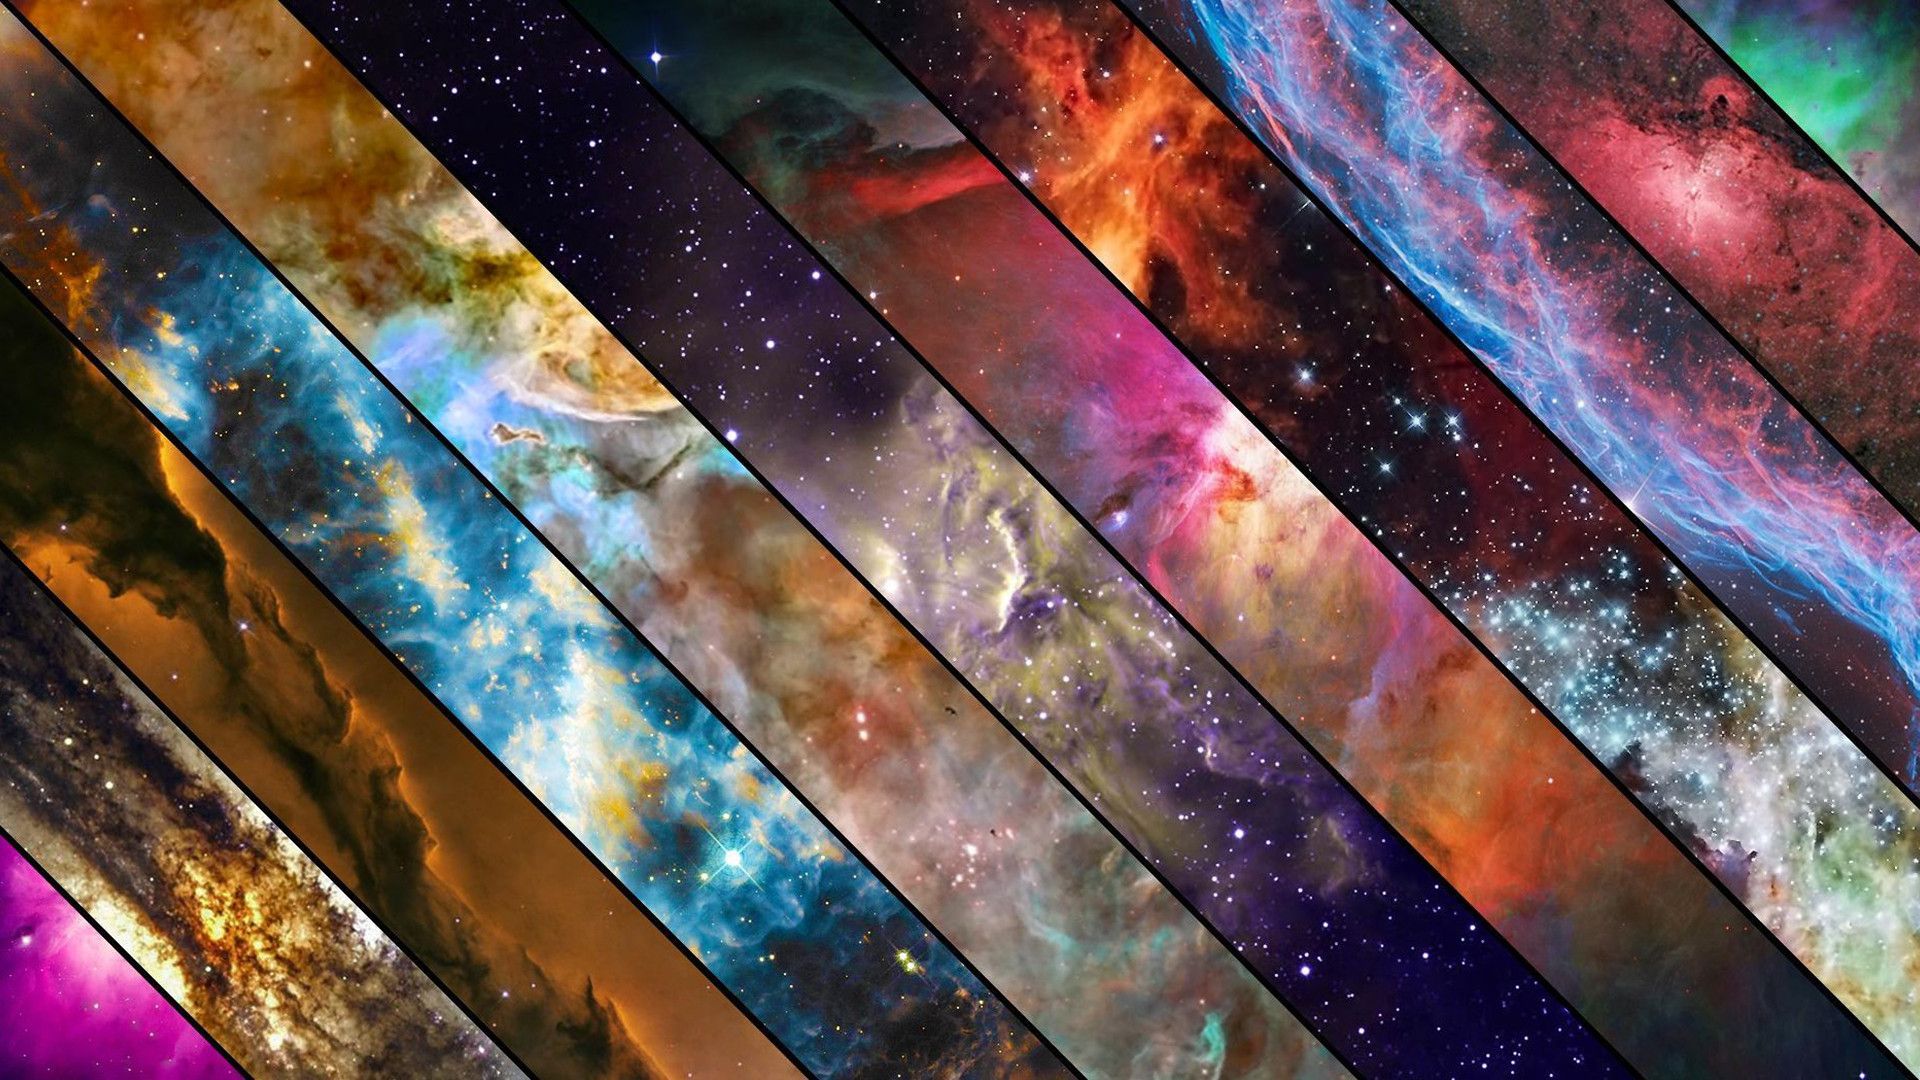 Abstract Space Nebula Collage HD Wallpaper | 1920x1080 | ID:53516